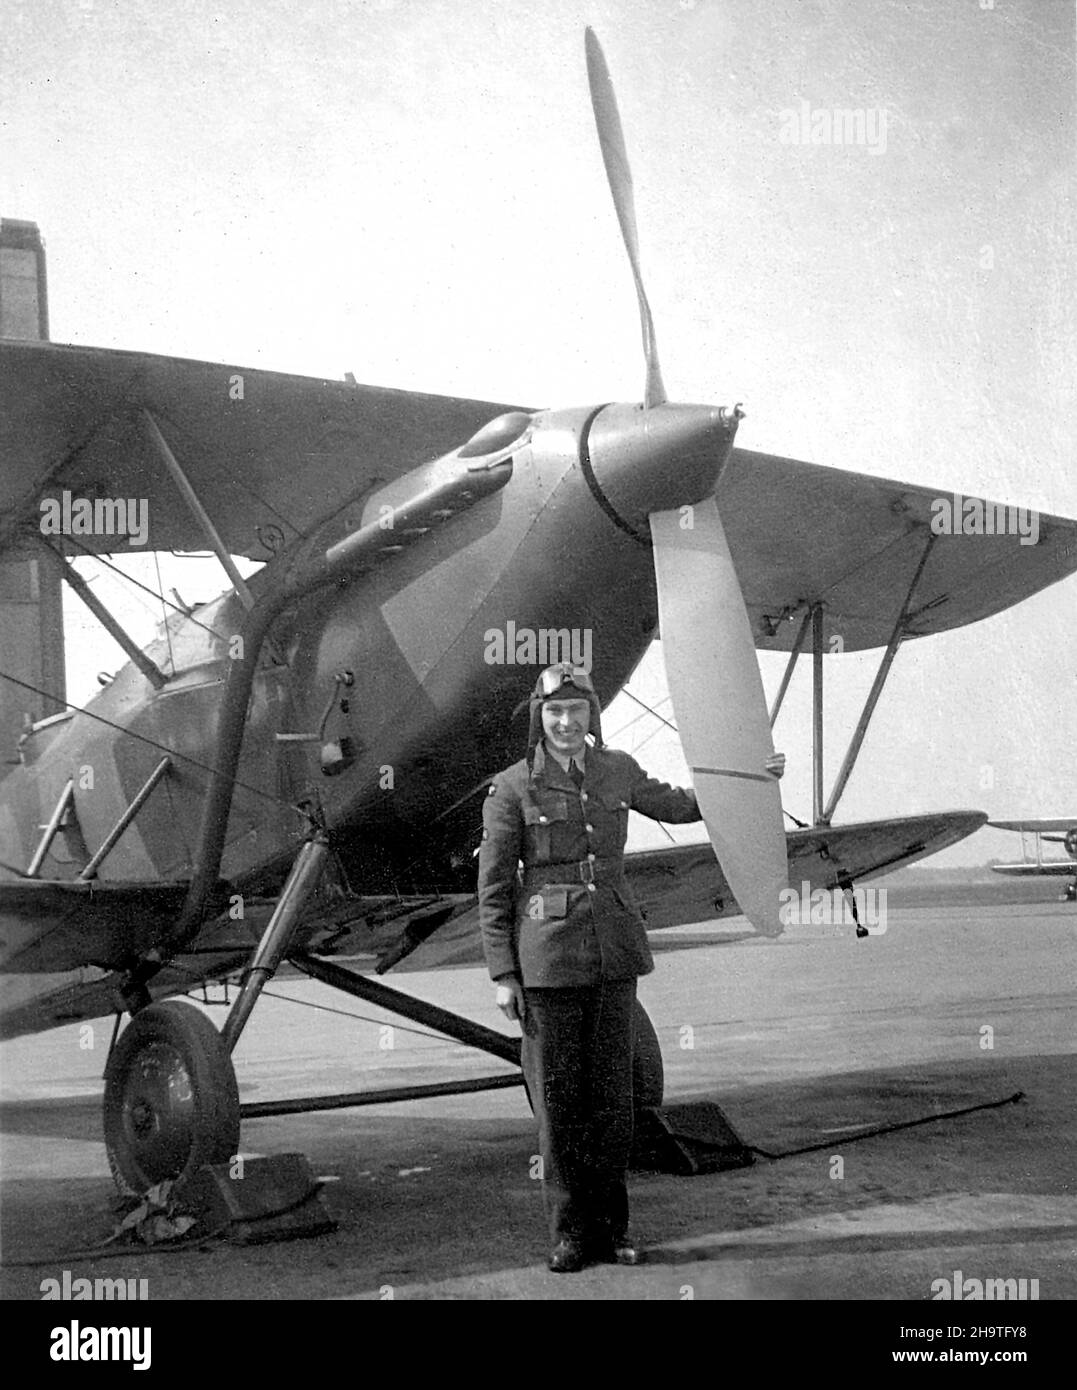 November 1938. RAF pilot with a Hawker Demon two-seat biplane fighter aircraft. The Demon was an interim fighter, replaced on the front-line by September 1939. Stock Photo